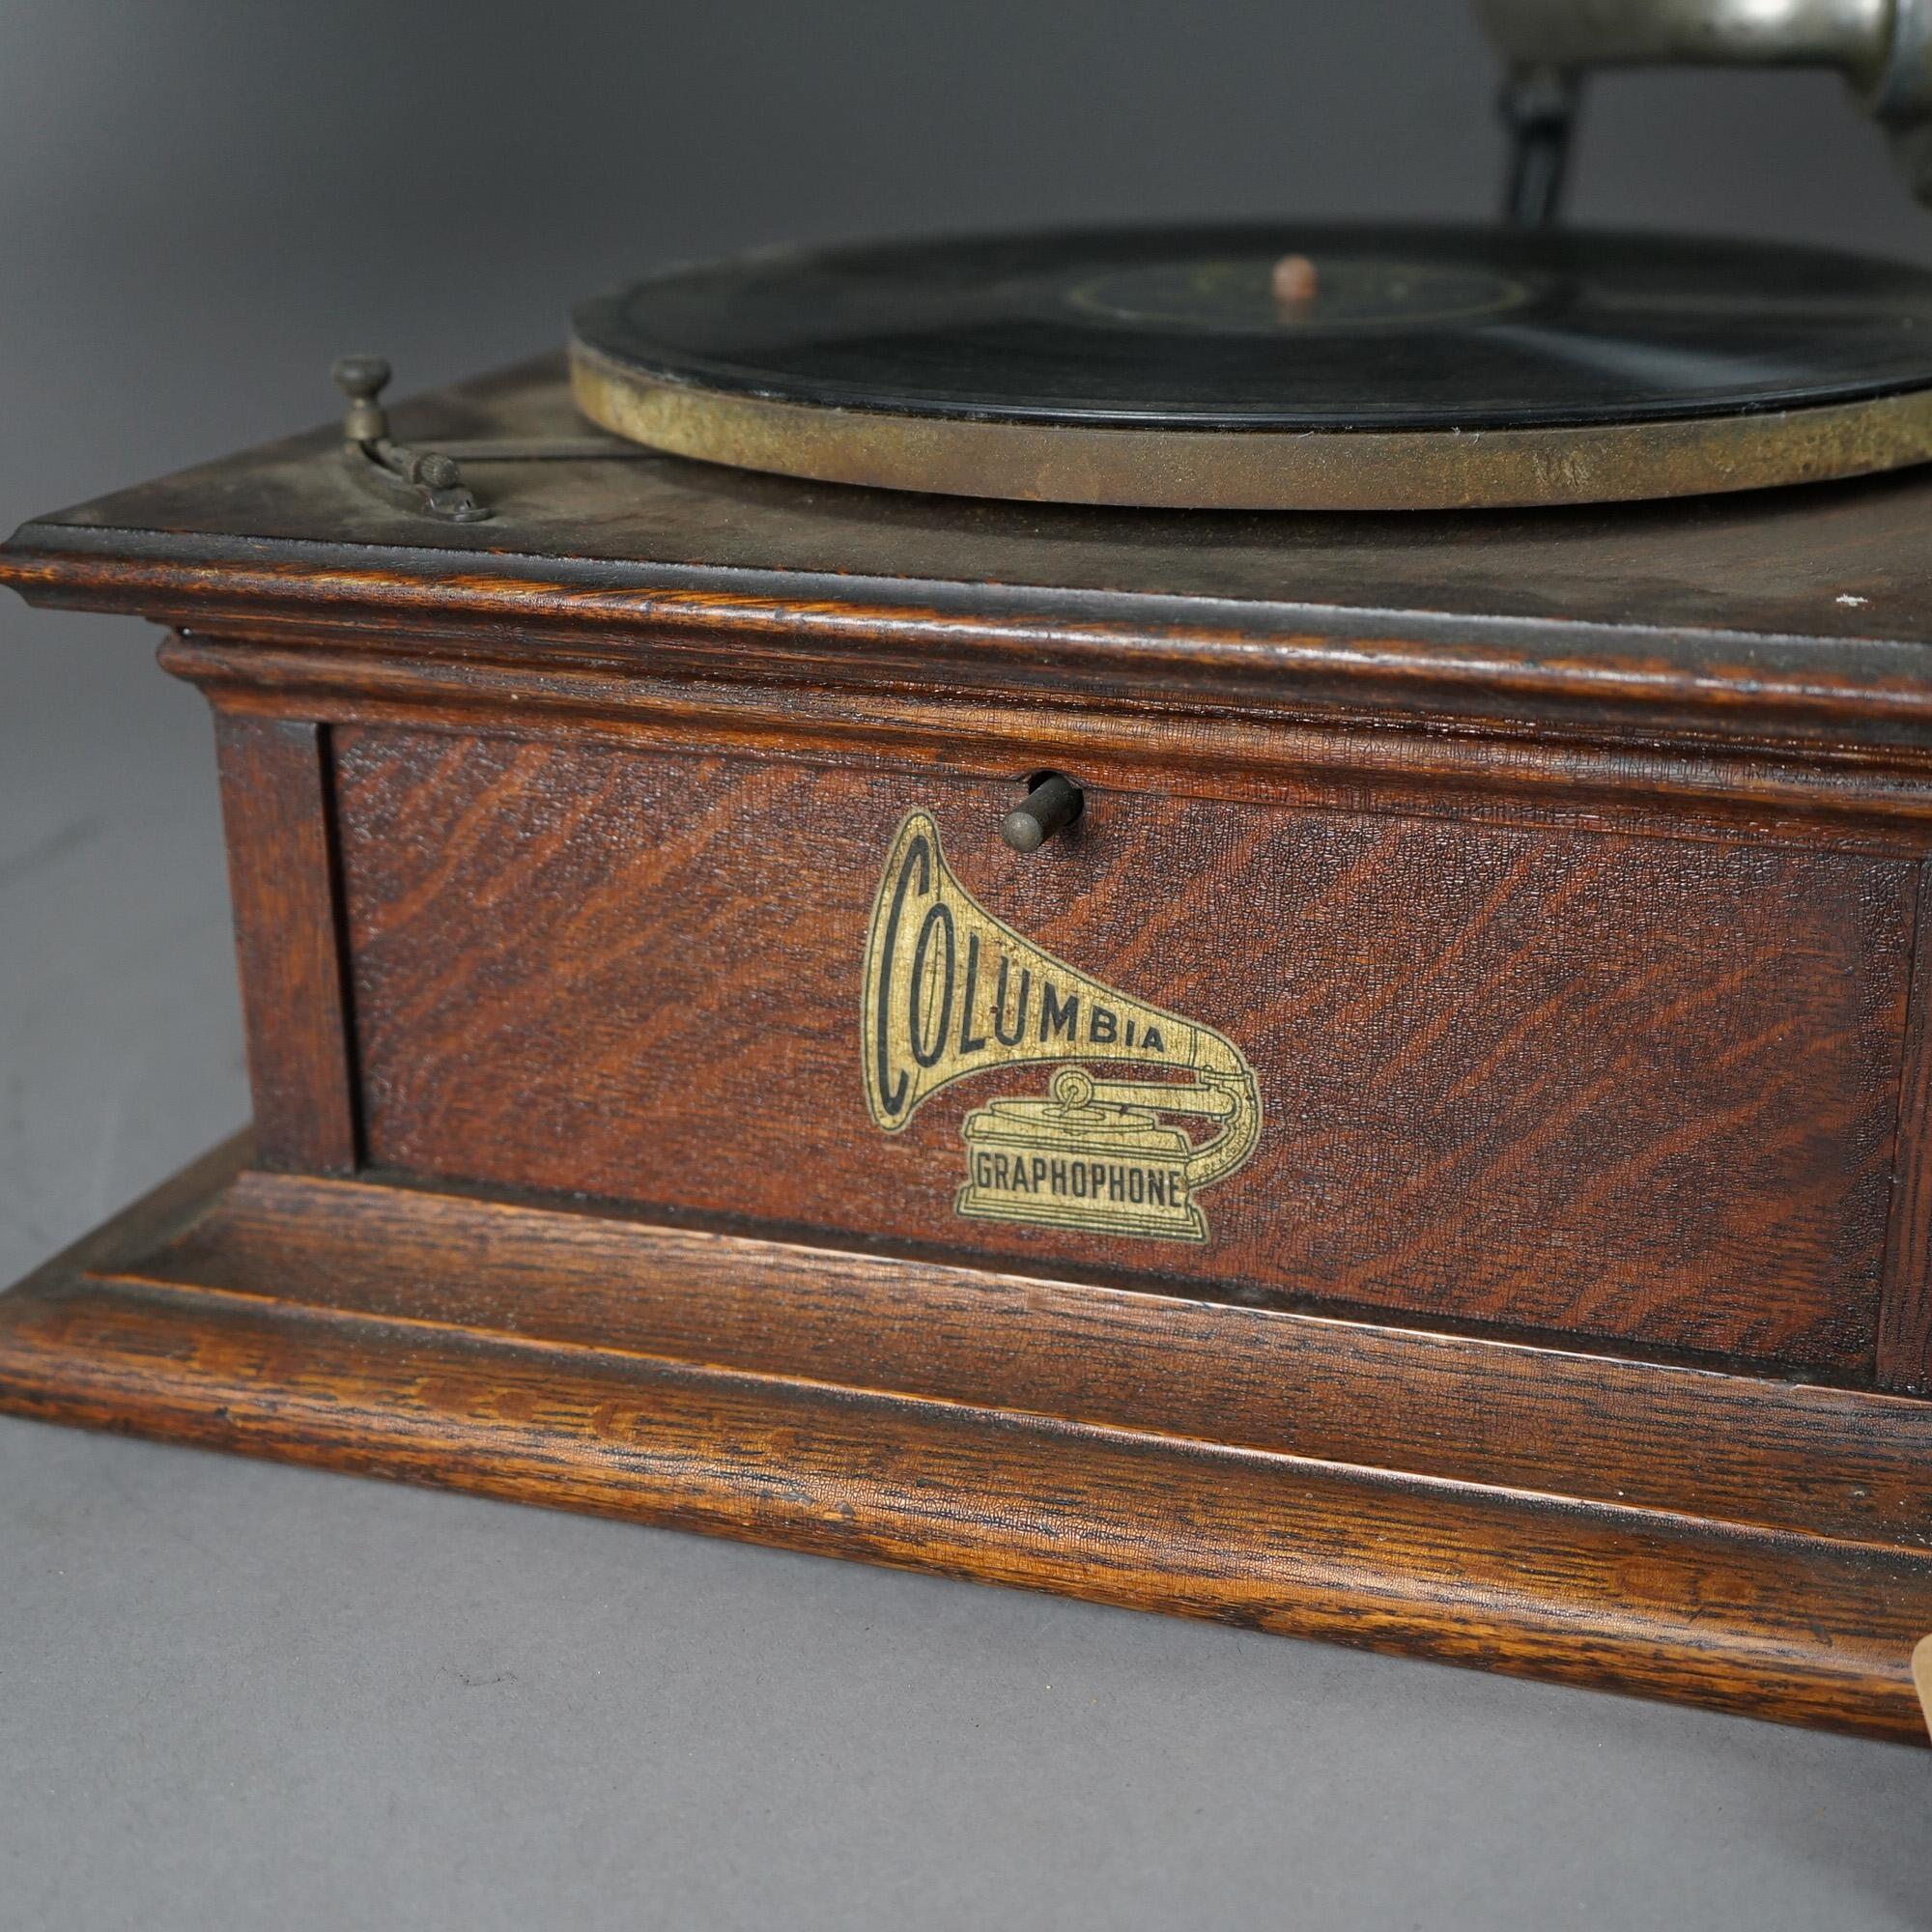 An antique Columbia Graphophone Victor Victrola disc player offers quarter sawn oak case with exterior green tulip for horn; very good working condition; maker label as photographed; c1910

Measures - 26.5